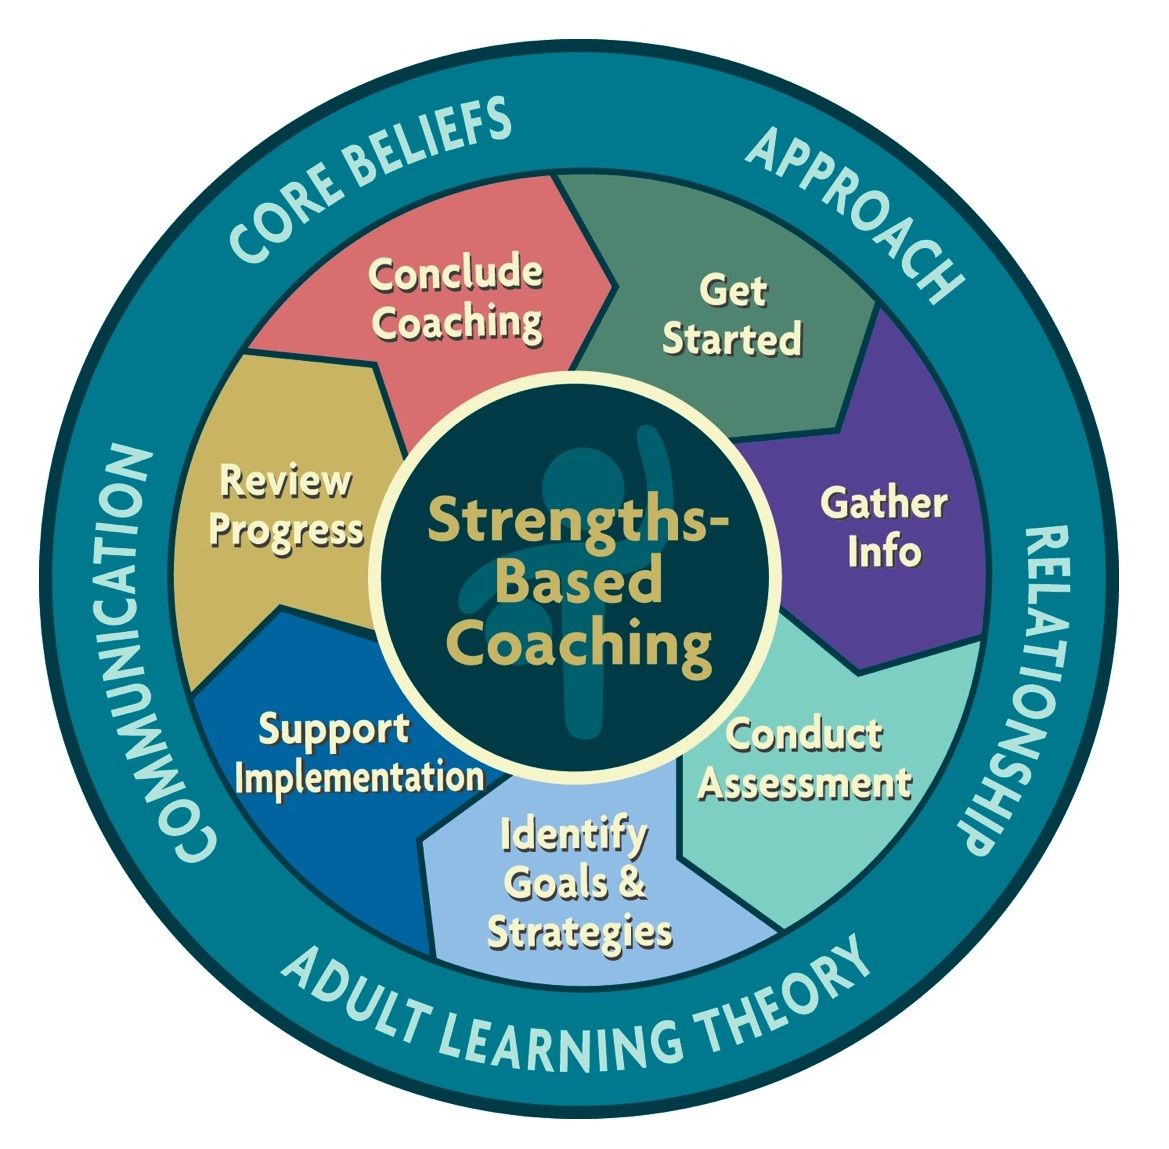 TRAINING ONLINE STRENGTHS-BASED COACHING